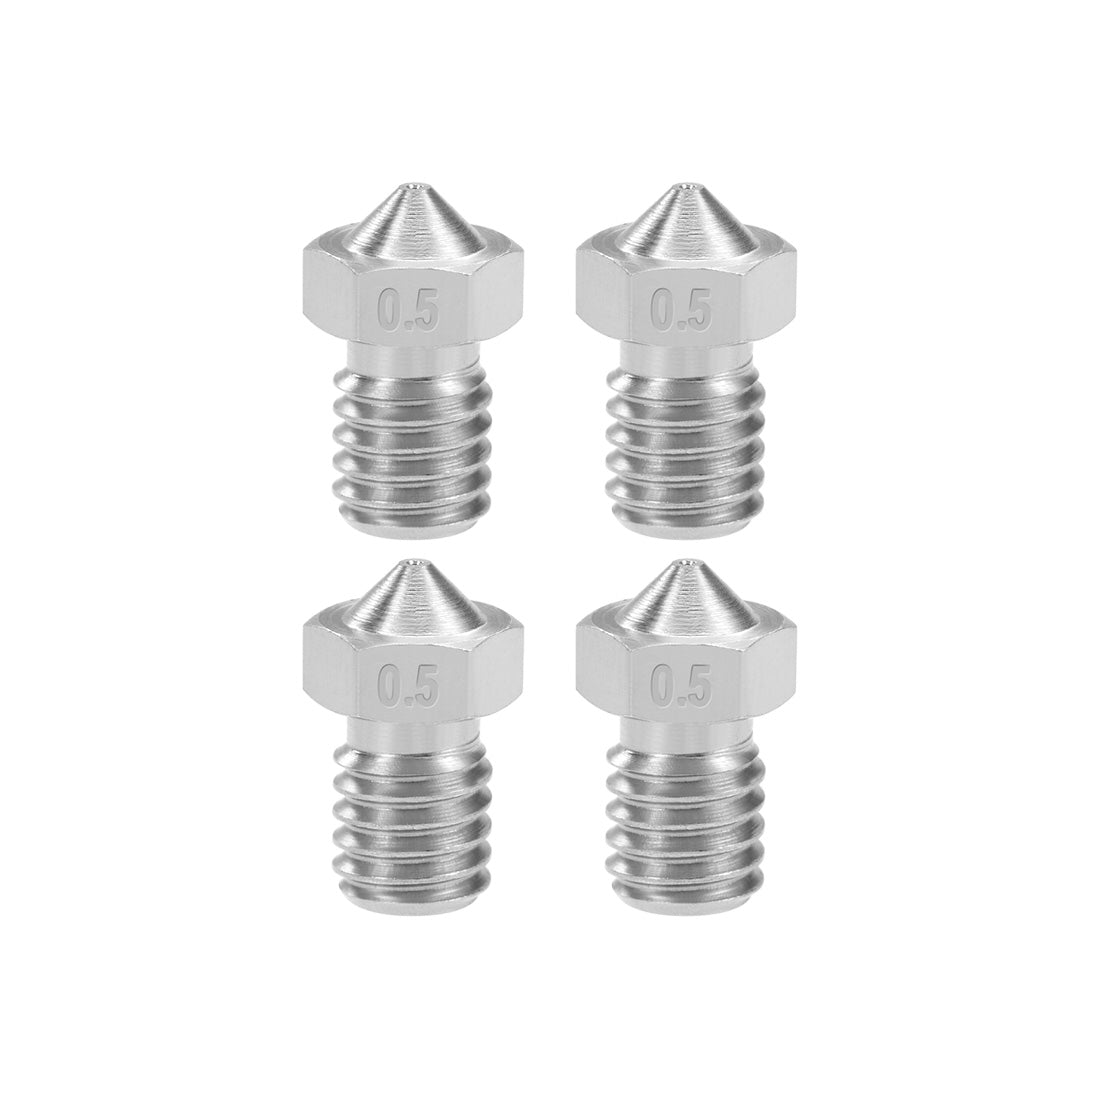 uxcell Uxcell 0.5mm 3D Printer Nozzle Head M6 Thread Replacement for V5 V6 1.75mm Extruder Print, Stainless Steel 4pcs